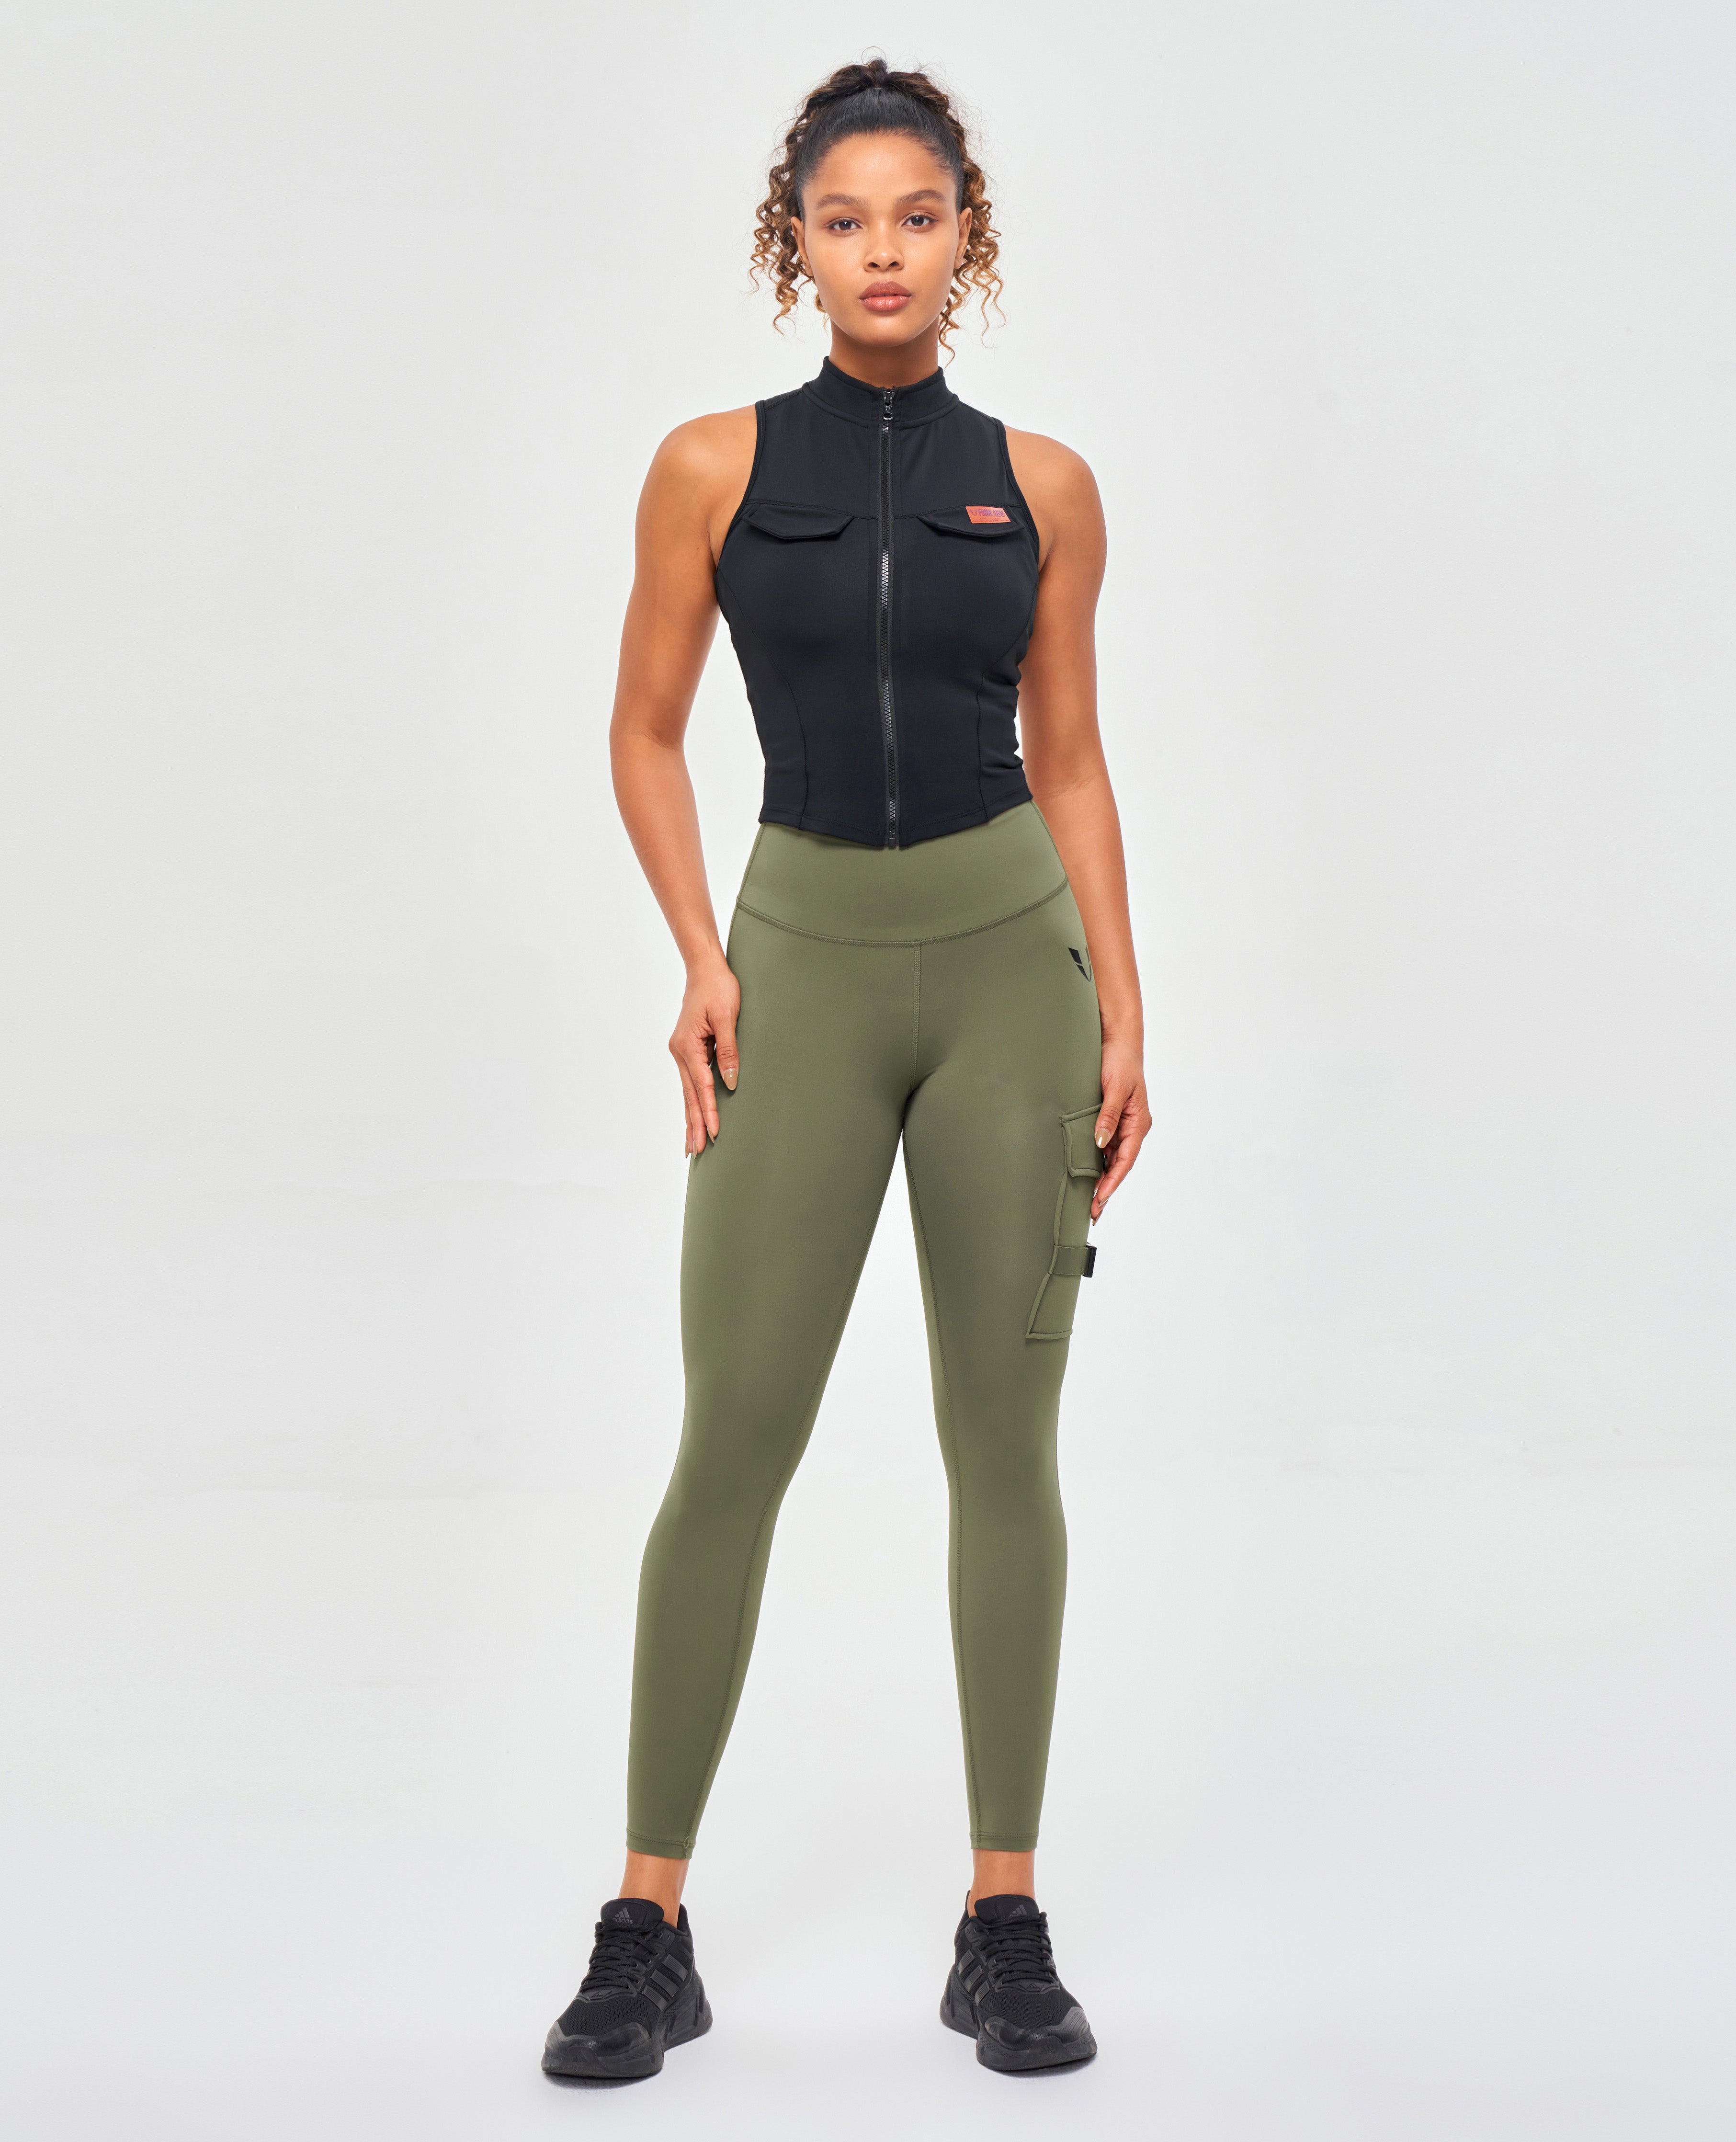 On The Run Olive Green Ribbed Leggings